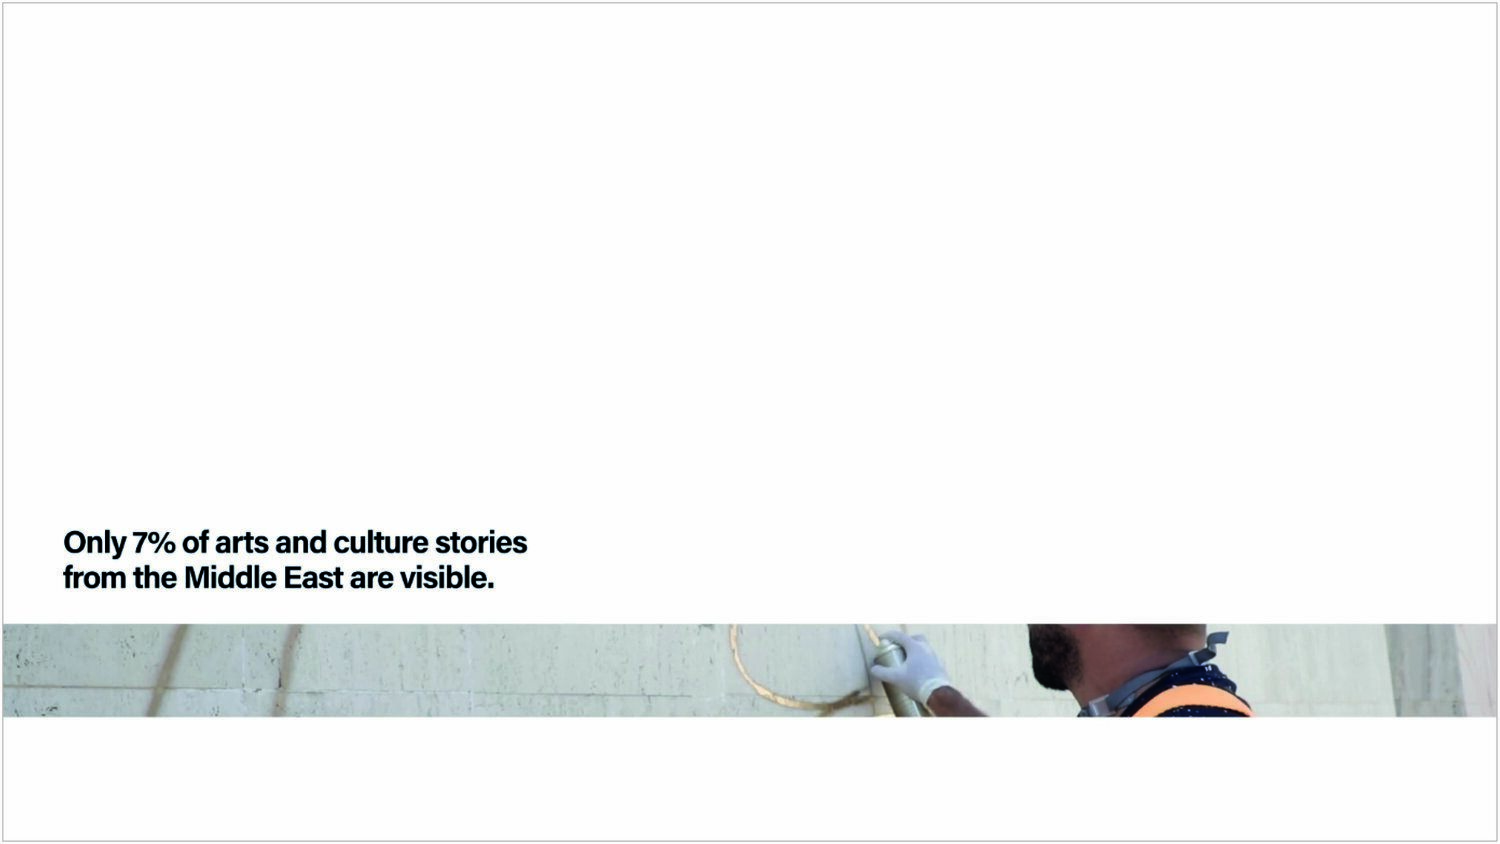 Only 7% of arts and culture stories from the Middle East are visible.